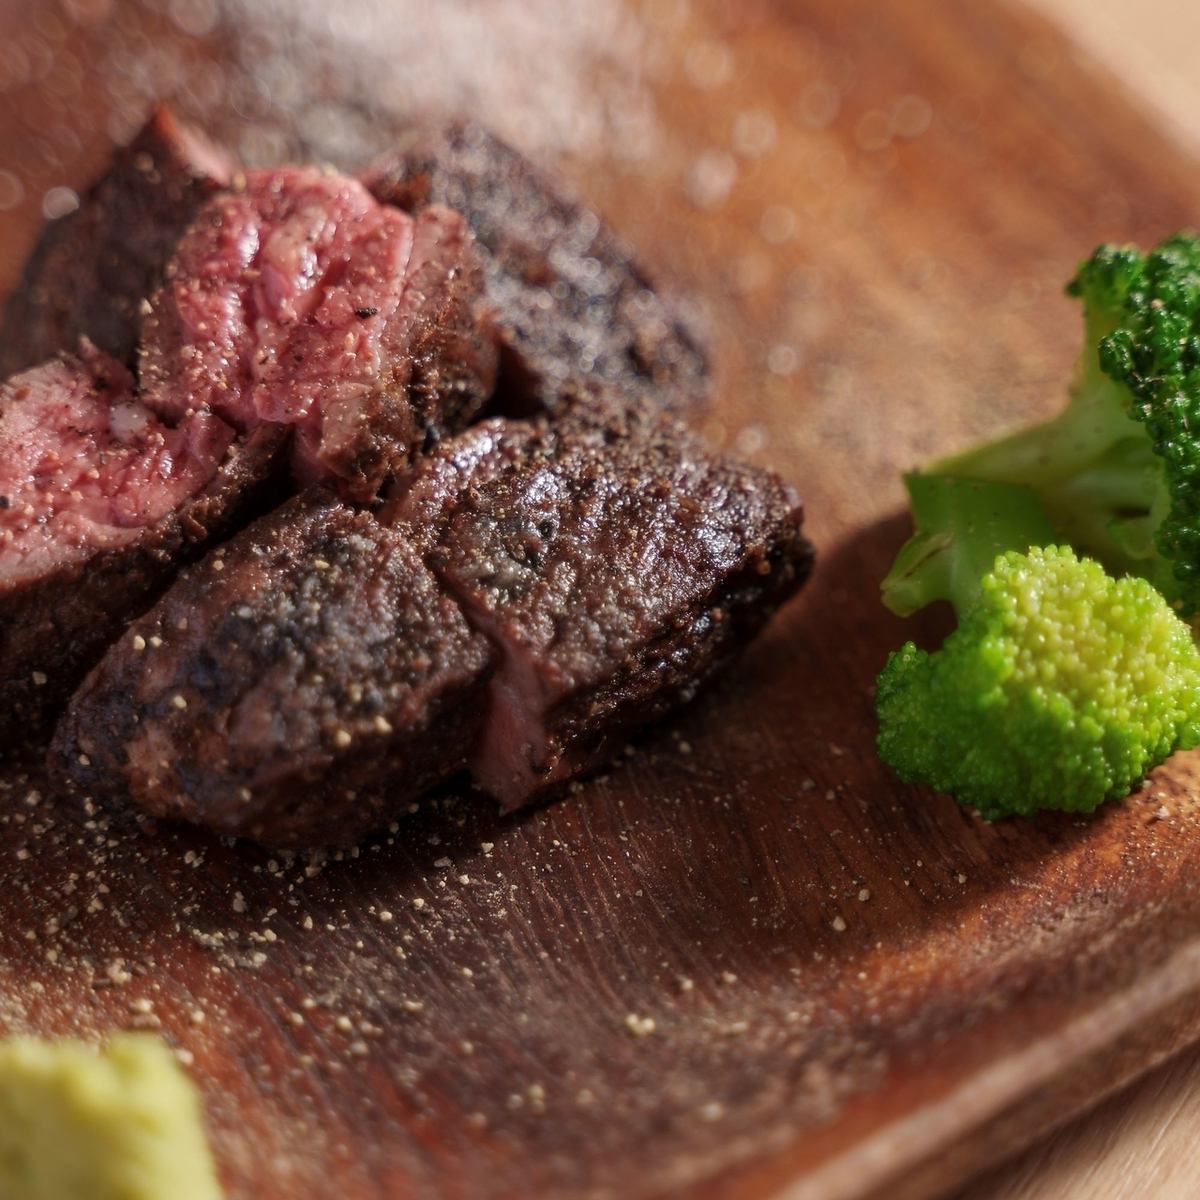 The charcoal-grilled meat is juicy and full of flavor.